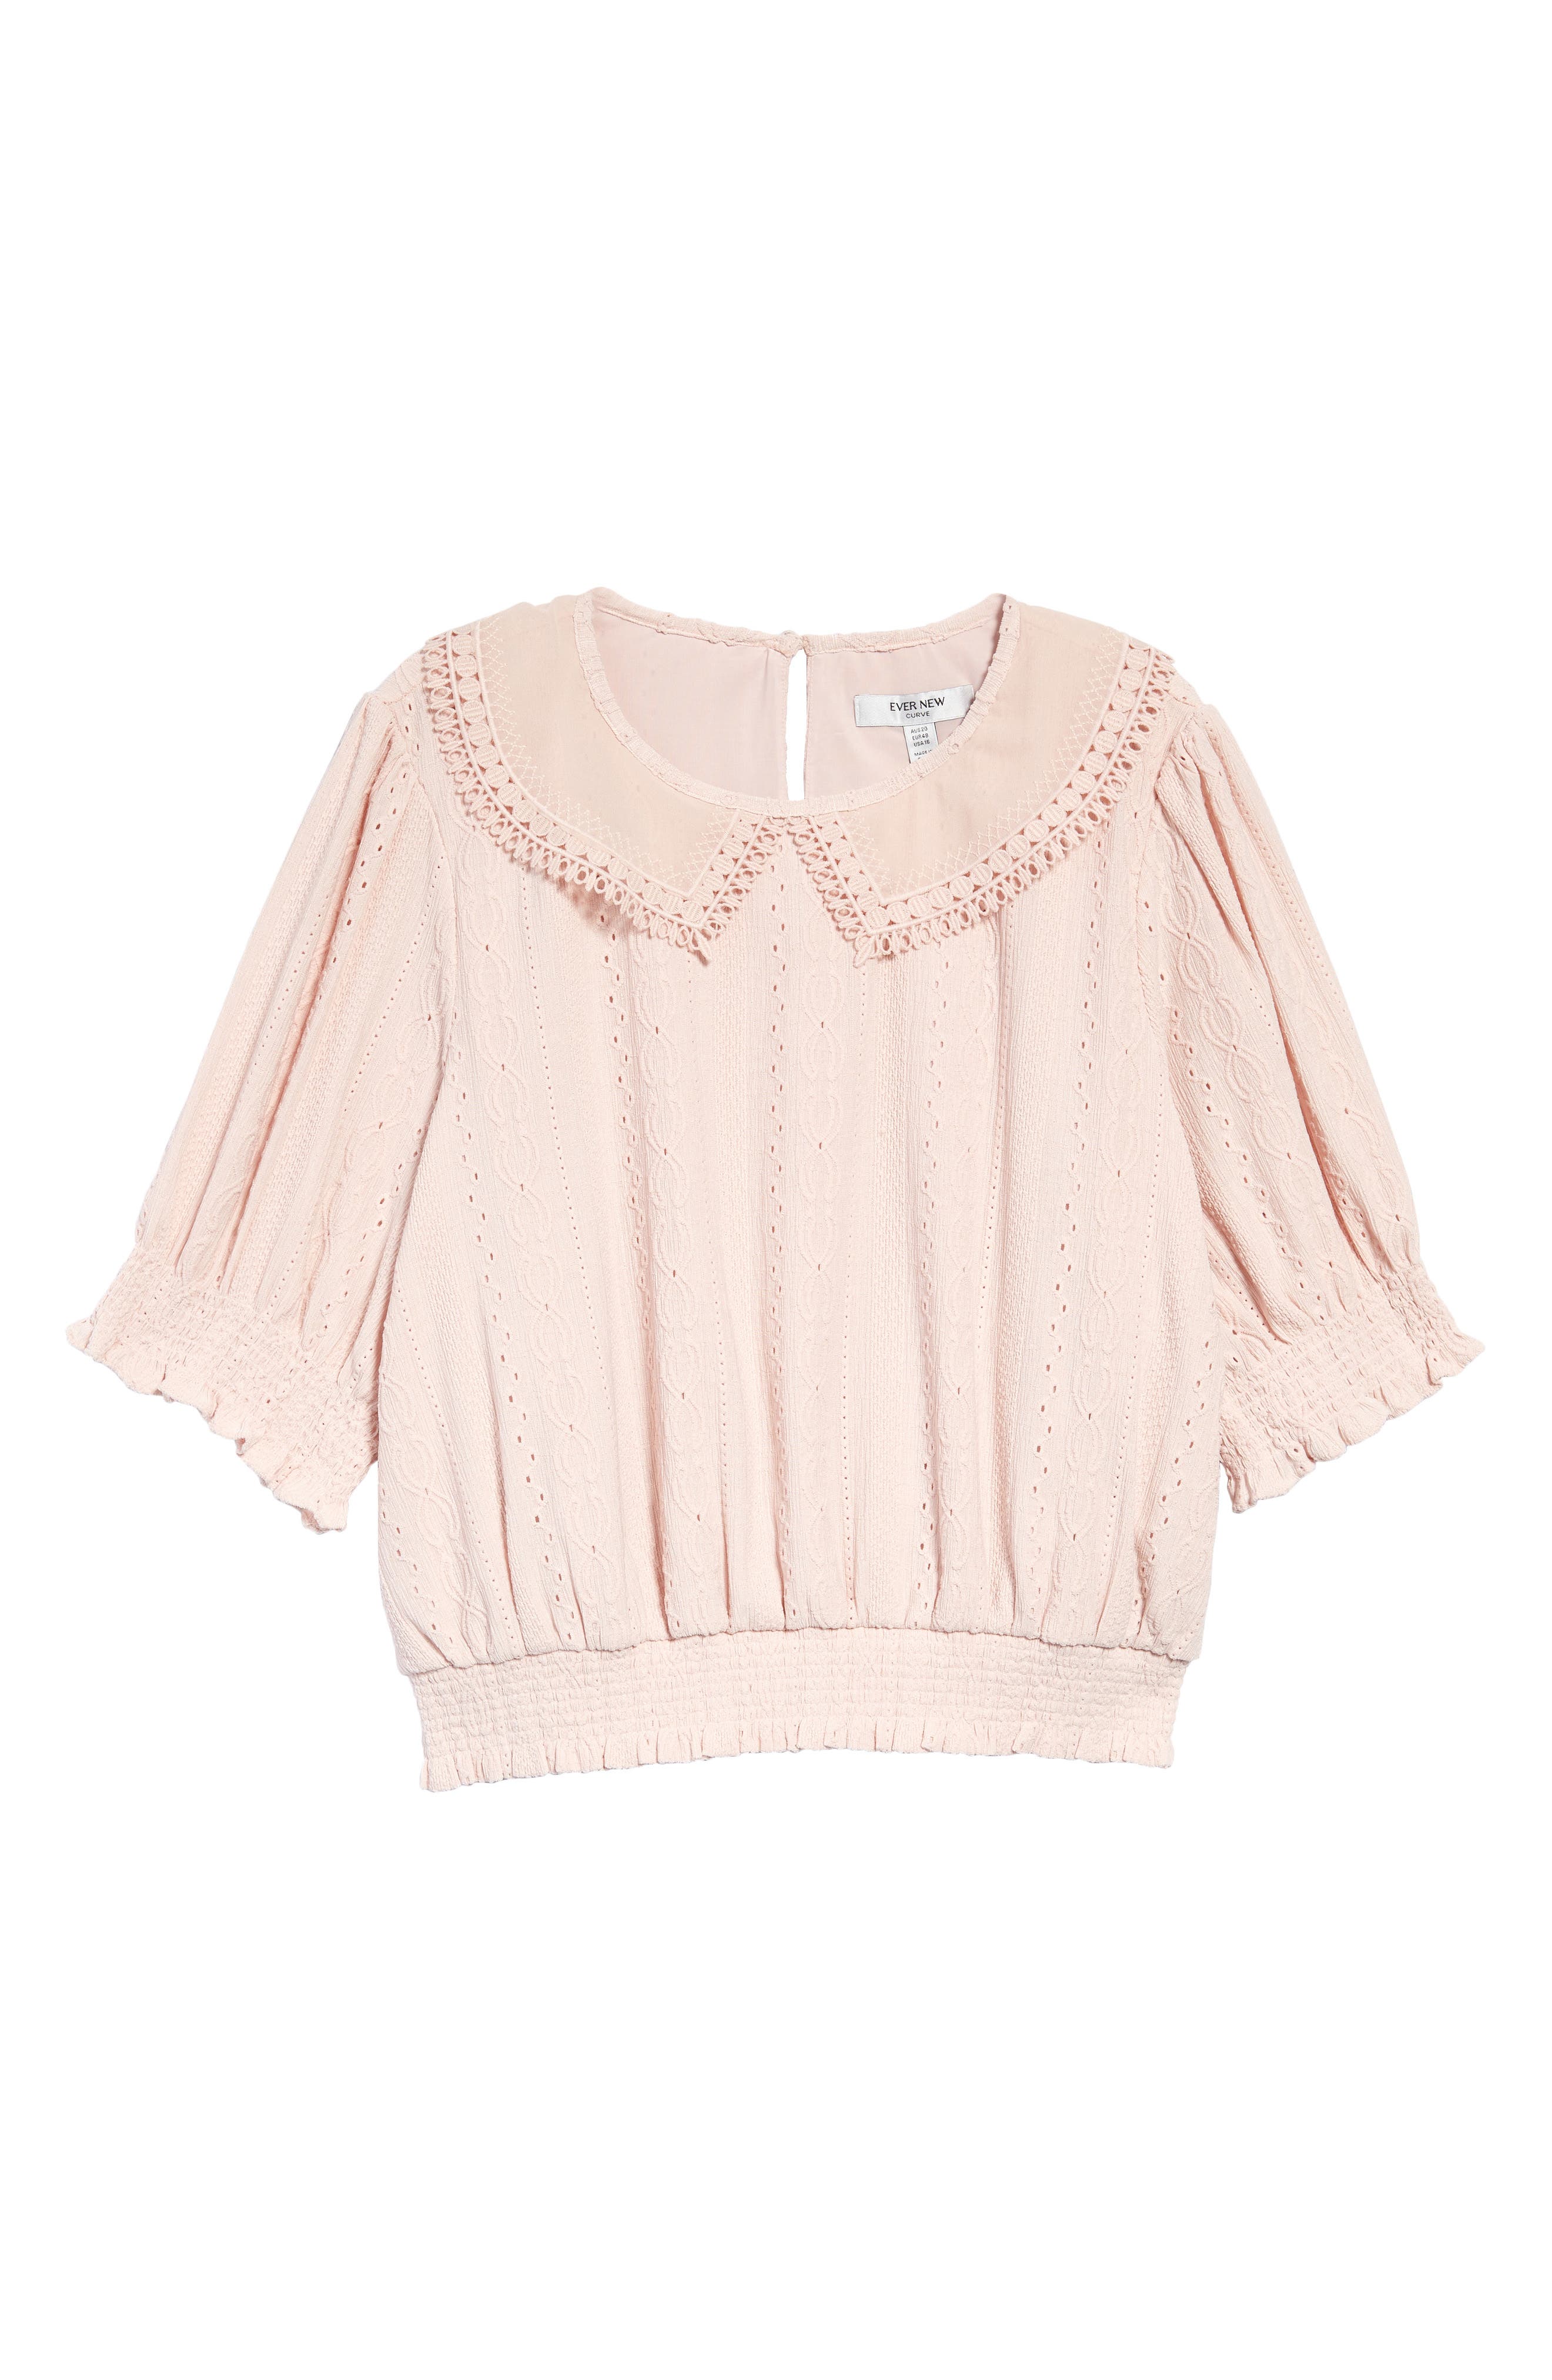 Ever New Broderie Anglaise Top in Blush at Nordstrom